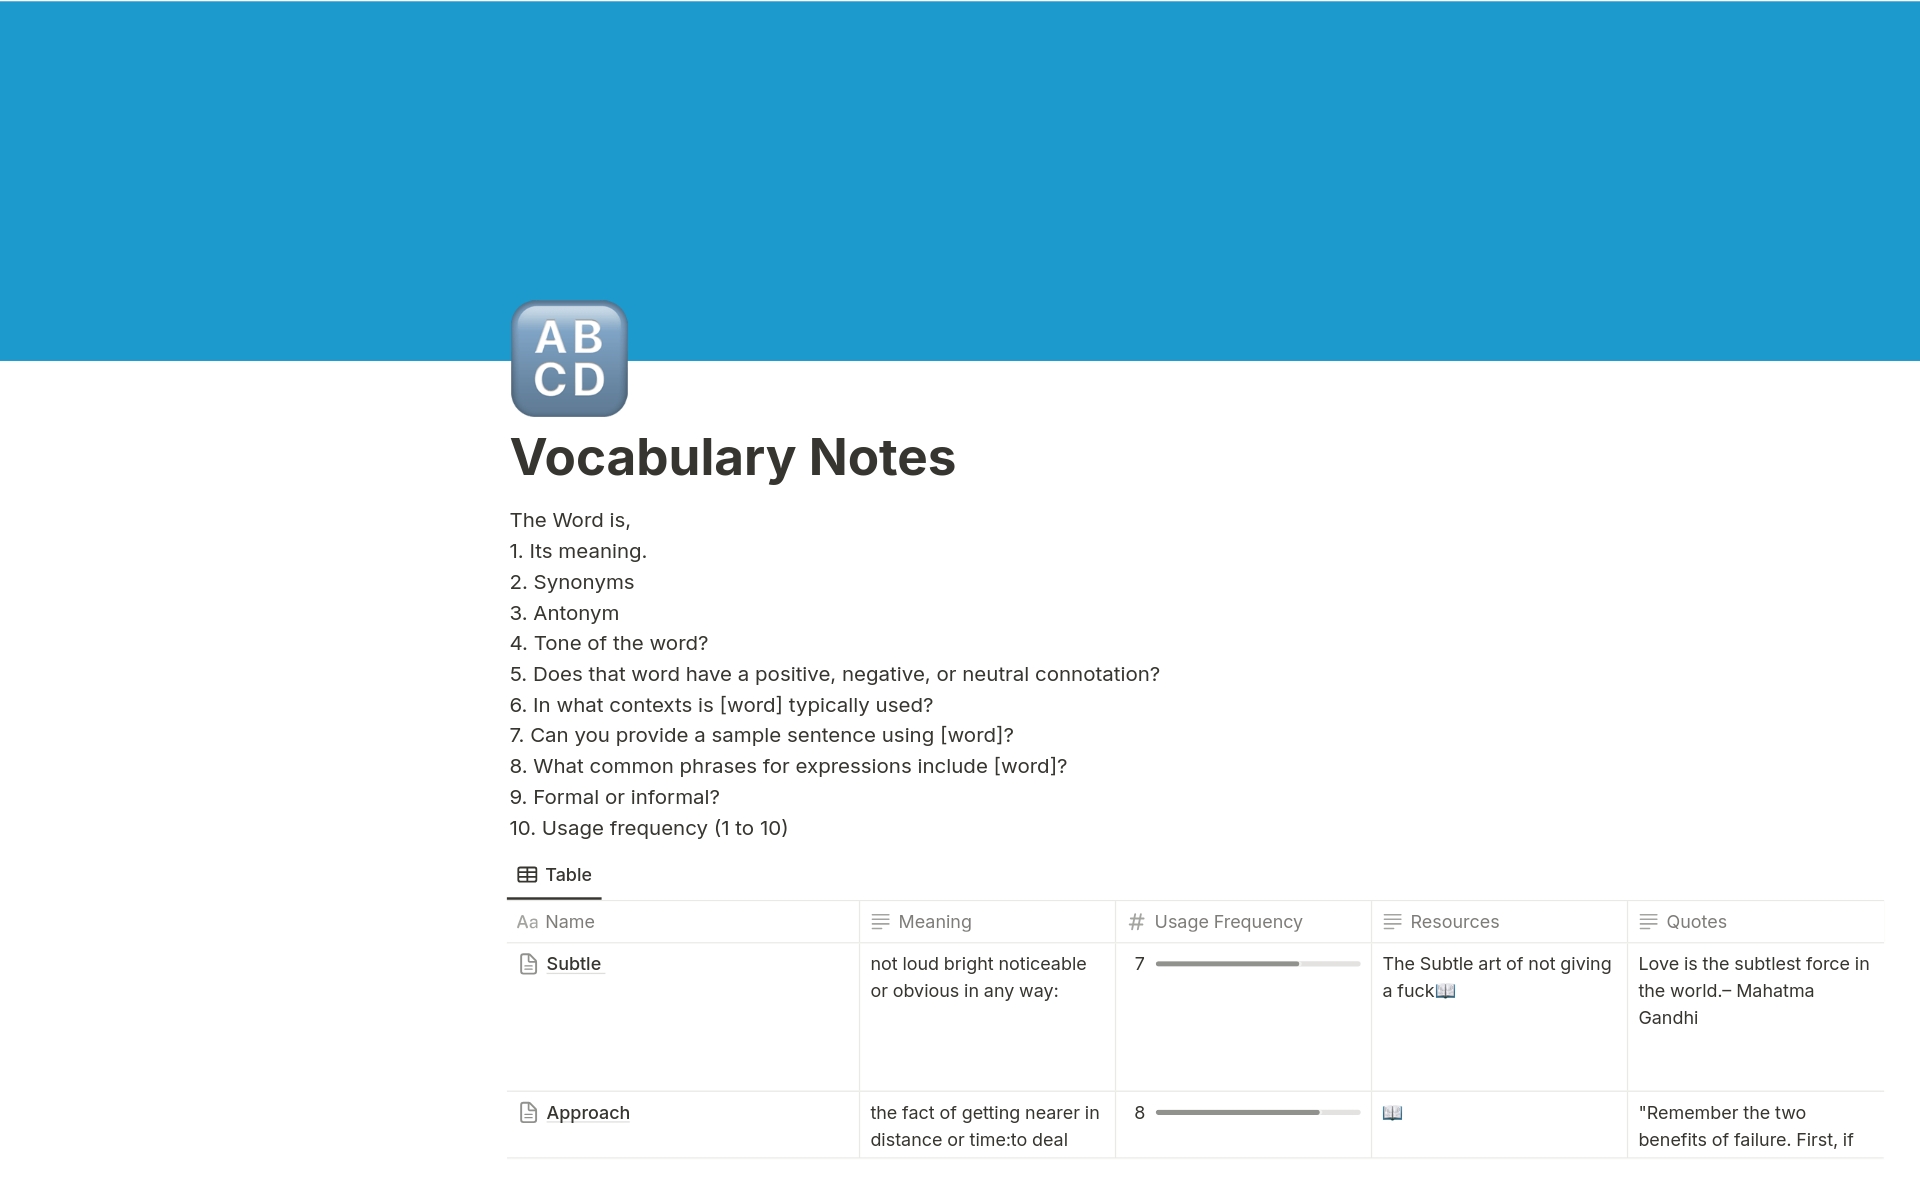 This template is designed for those looking to improve their vocabulary, especially in English.